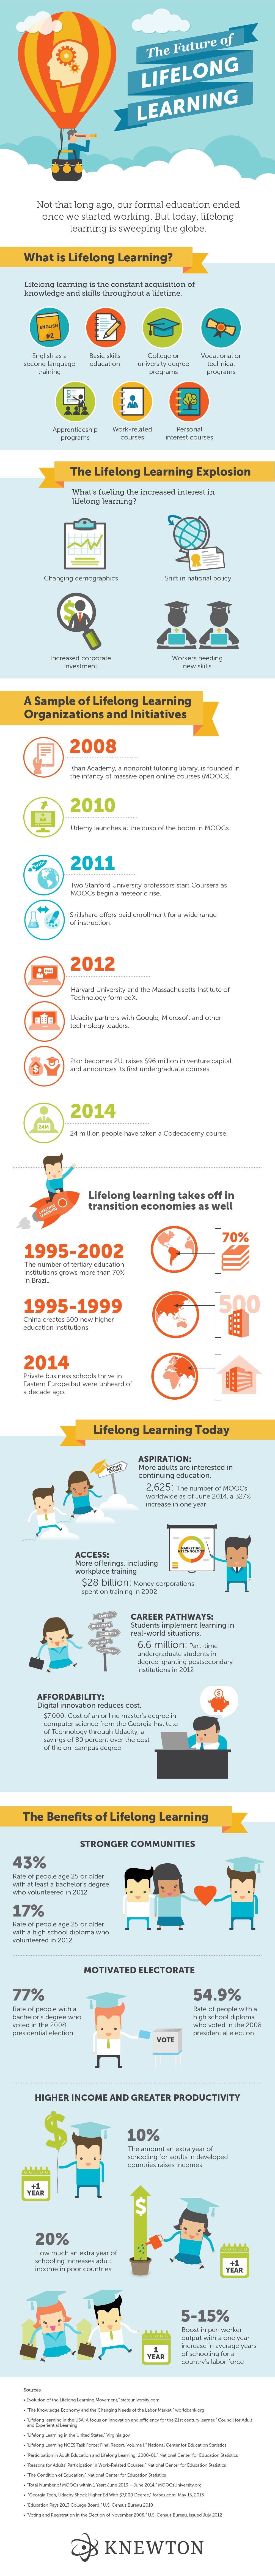 The Future of Lifelong Learning Infographic